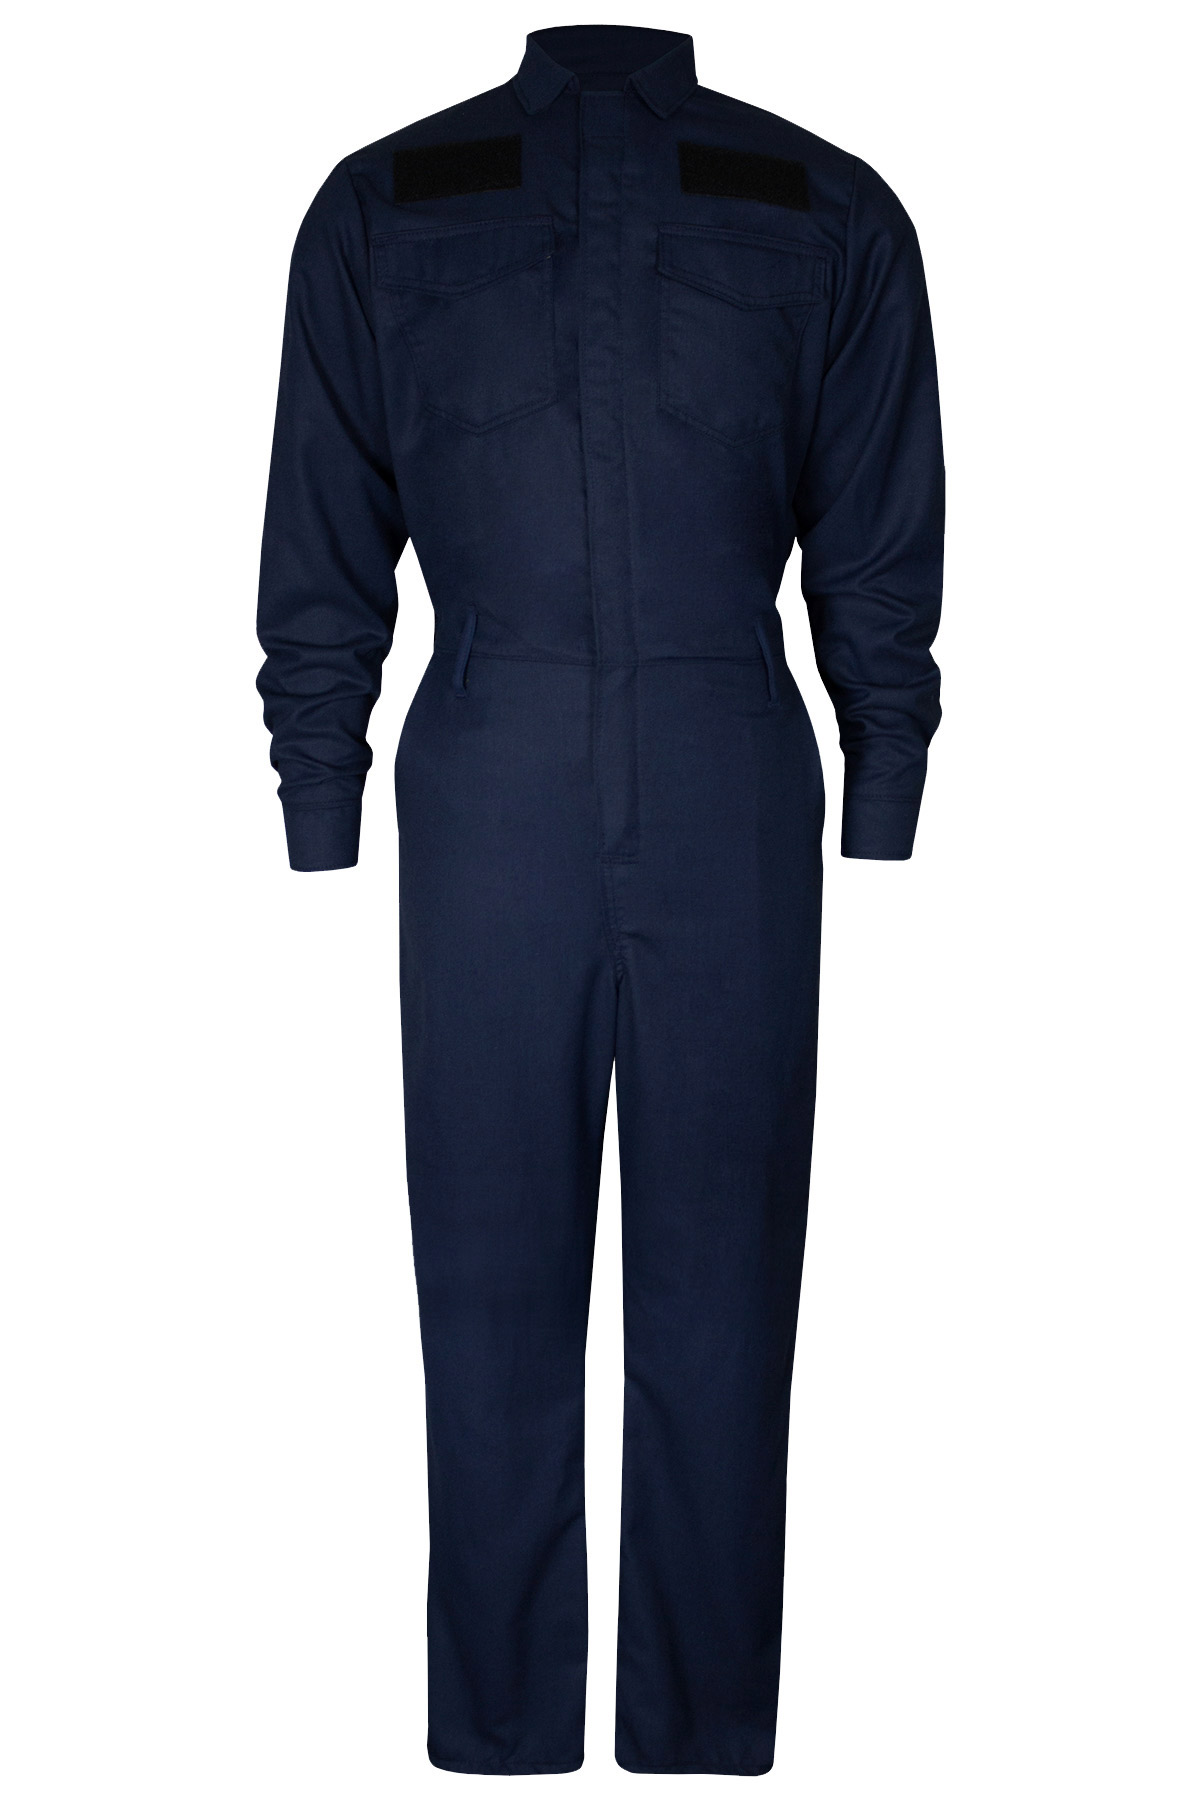 ** New Product** DRIFIRE FR Maintenance Coverall  SIZE - 5X LENGTH - 28" CO